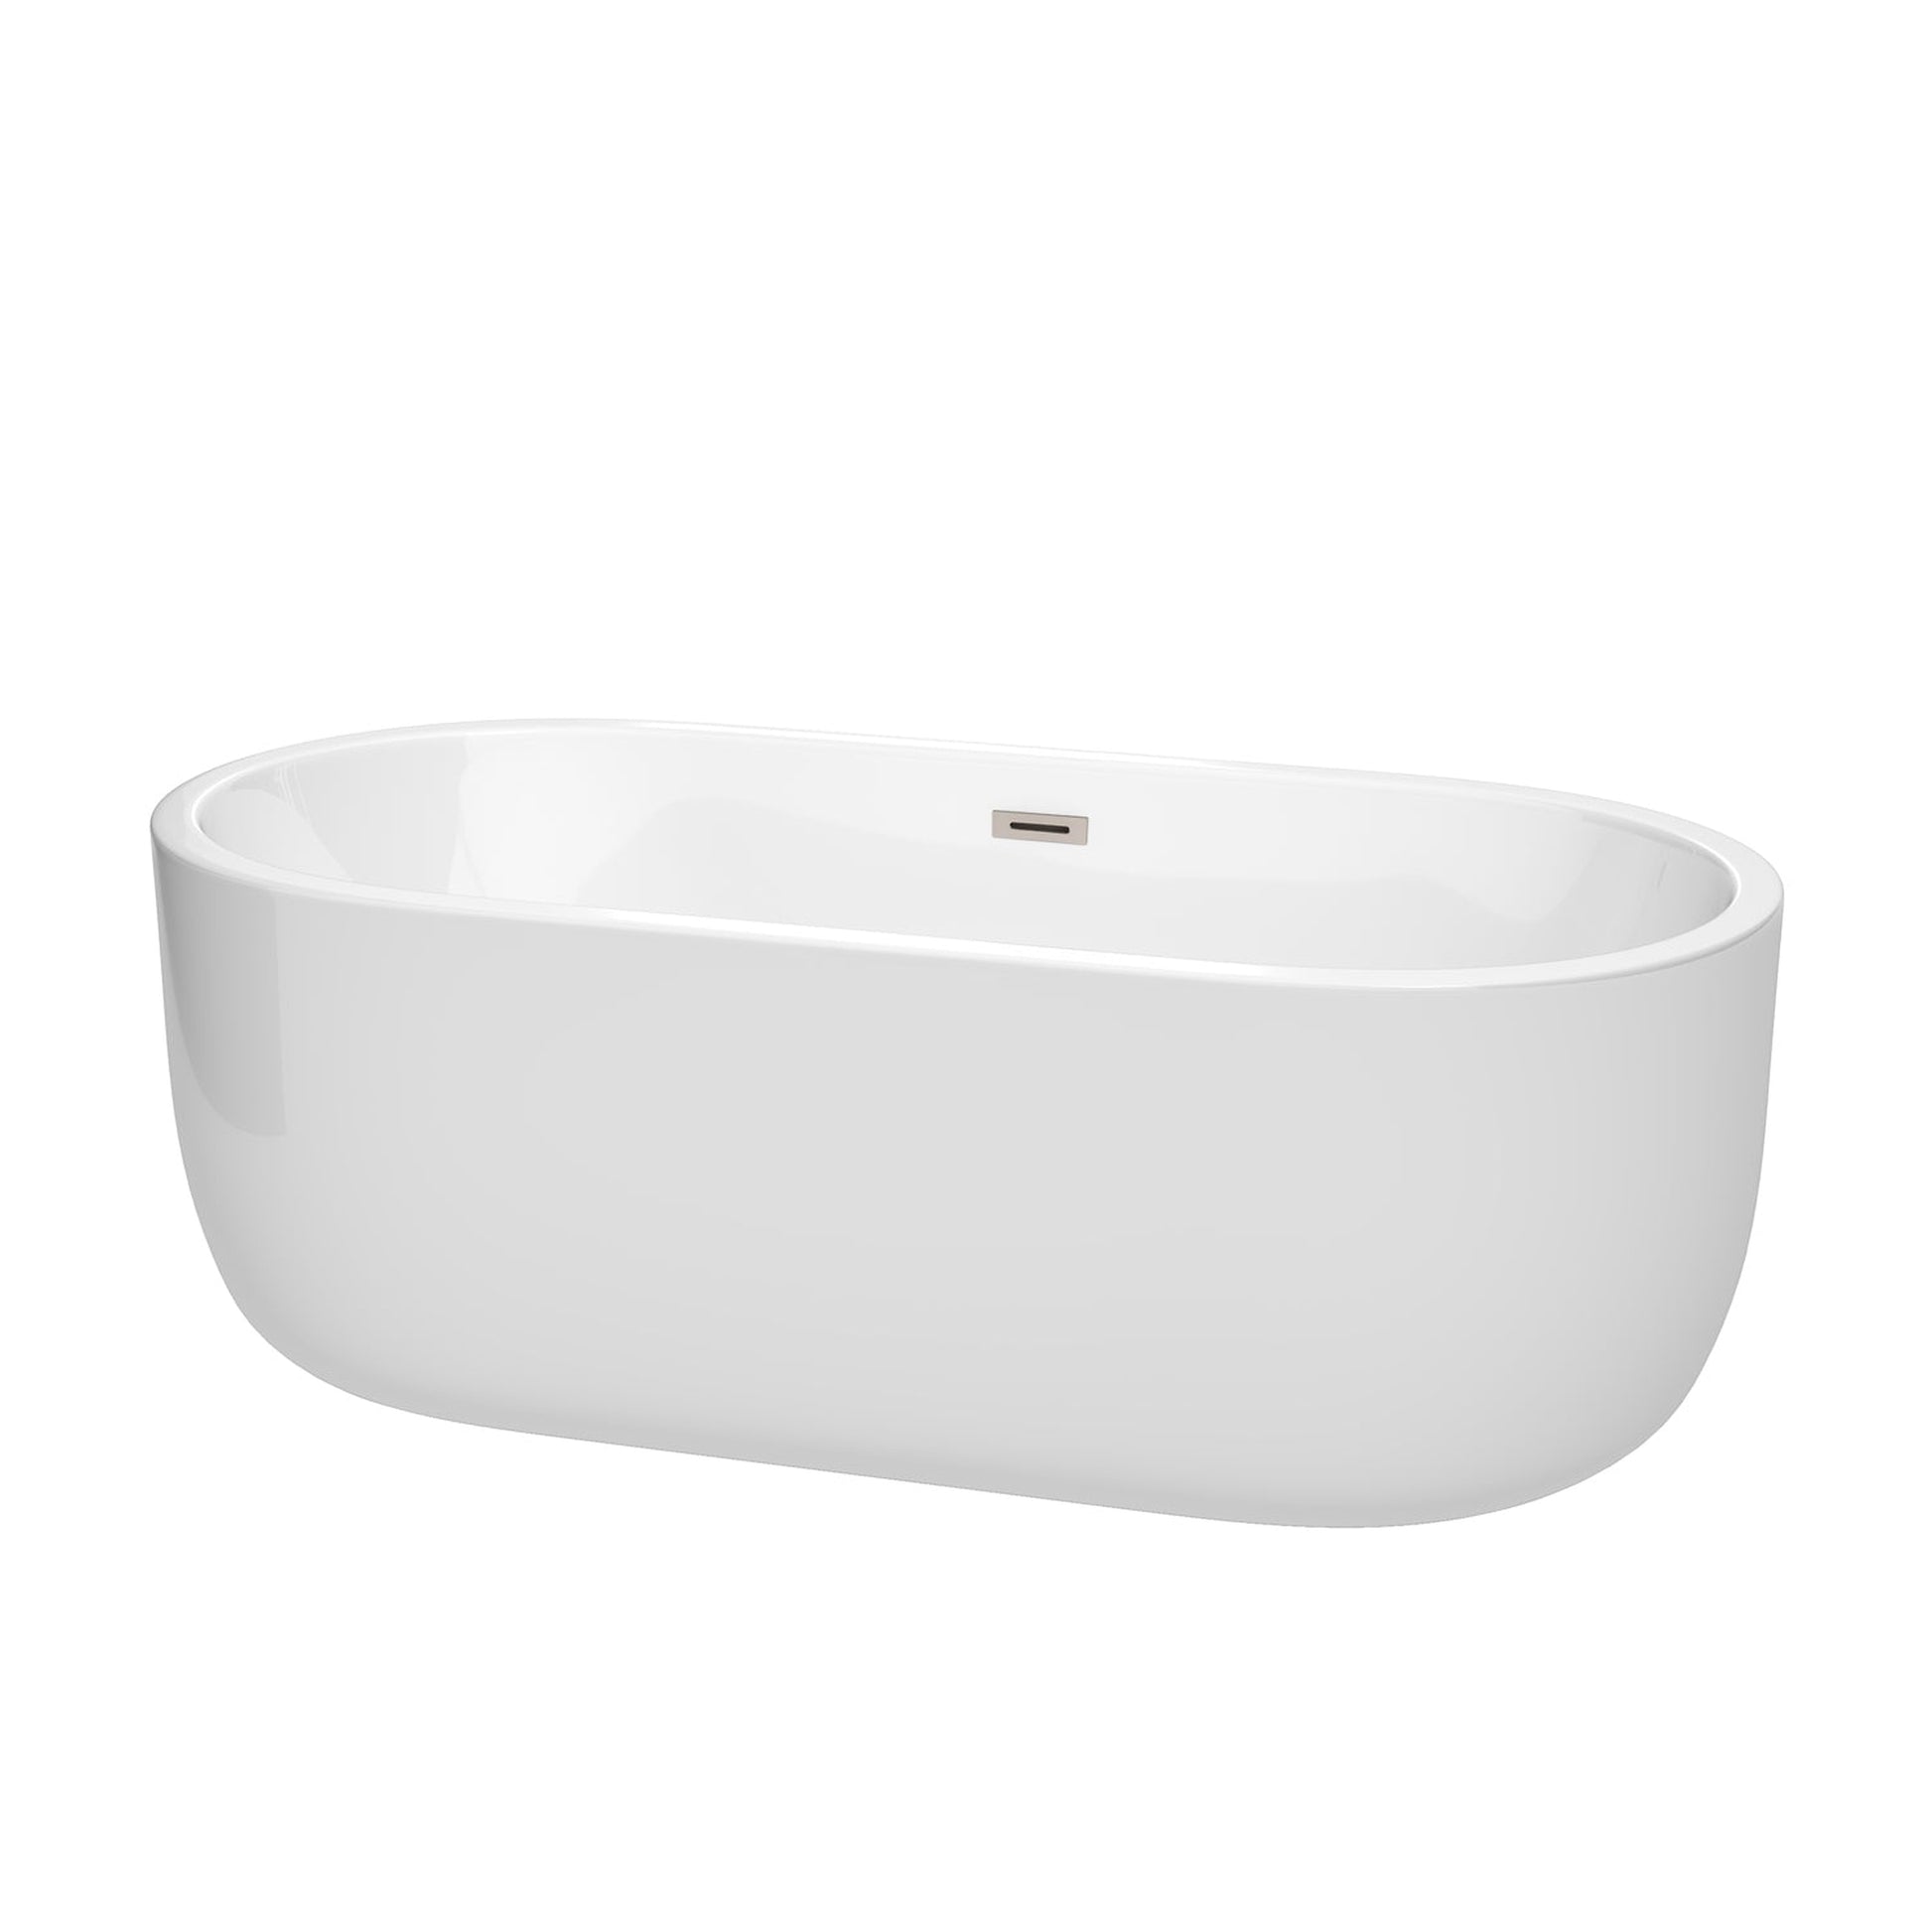 Wyndham Collection Juliette 67" Freestanding Bathtub in White With Brushed Nickel Drain and Overflow Trim